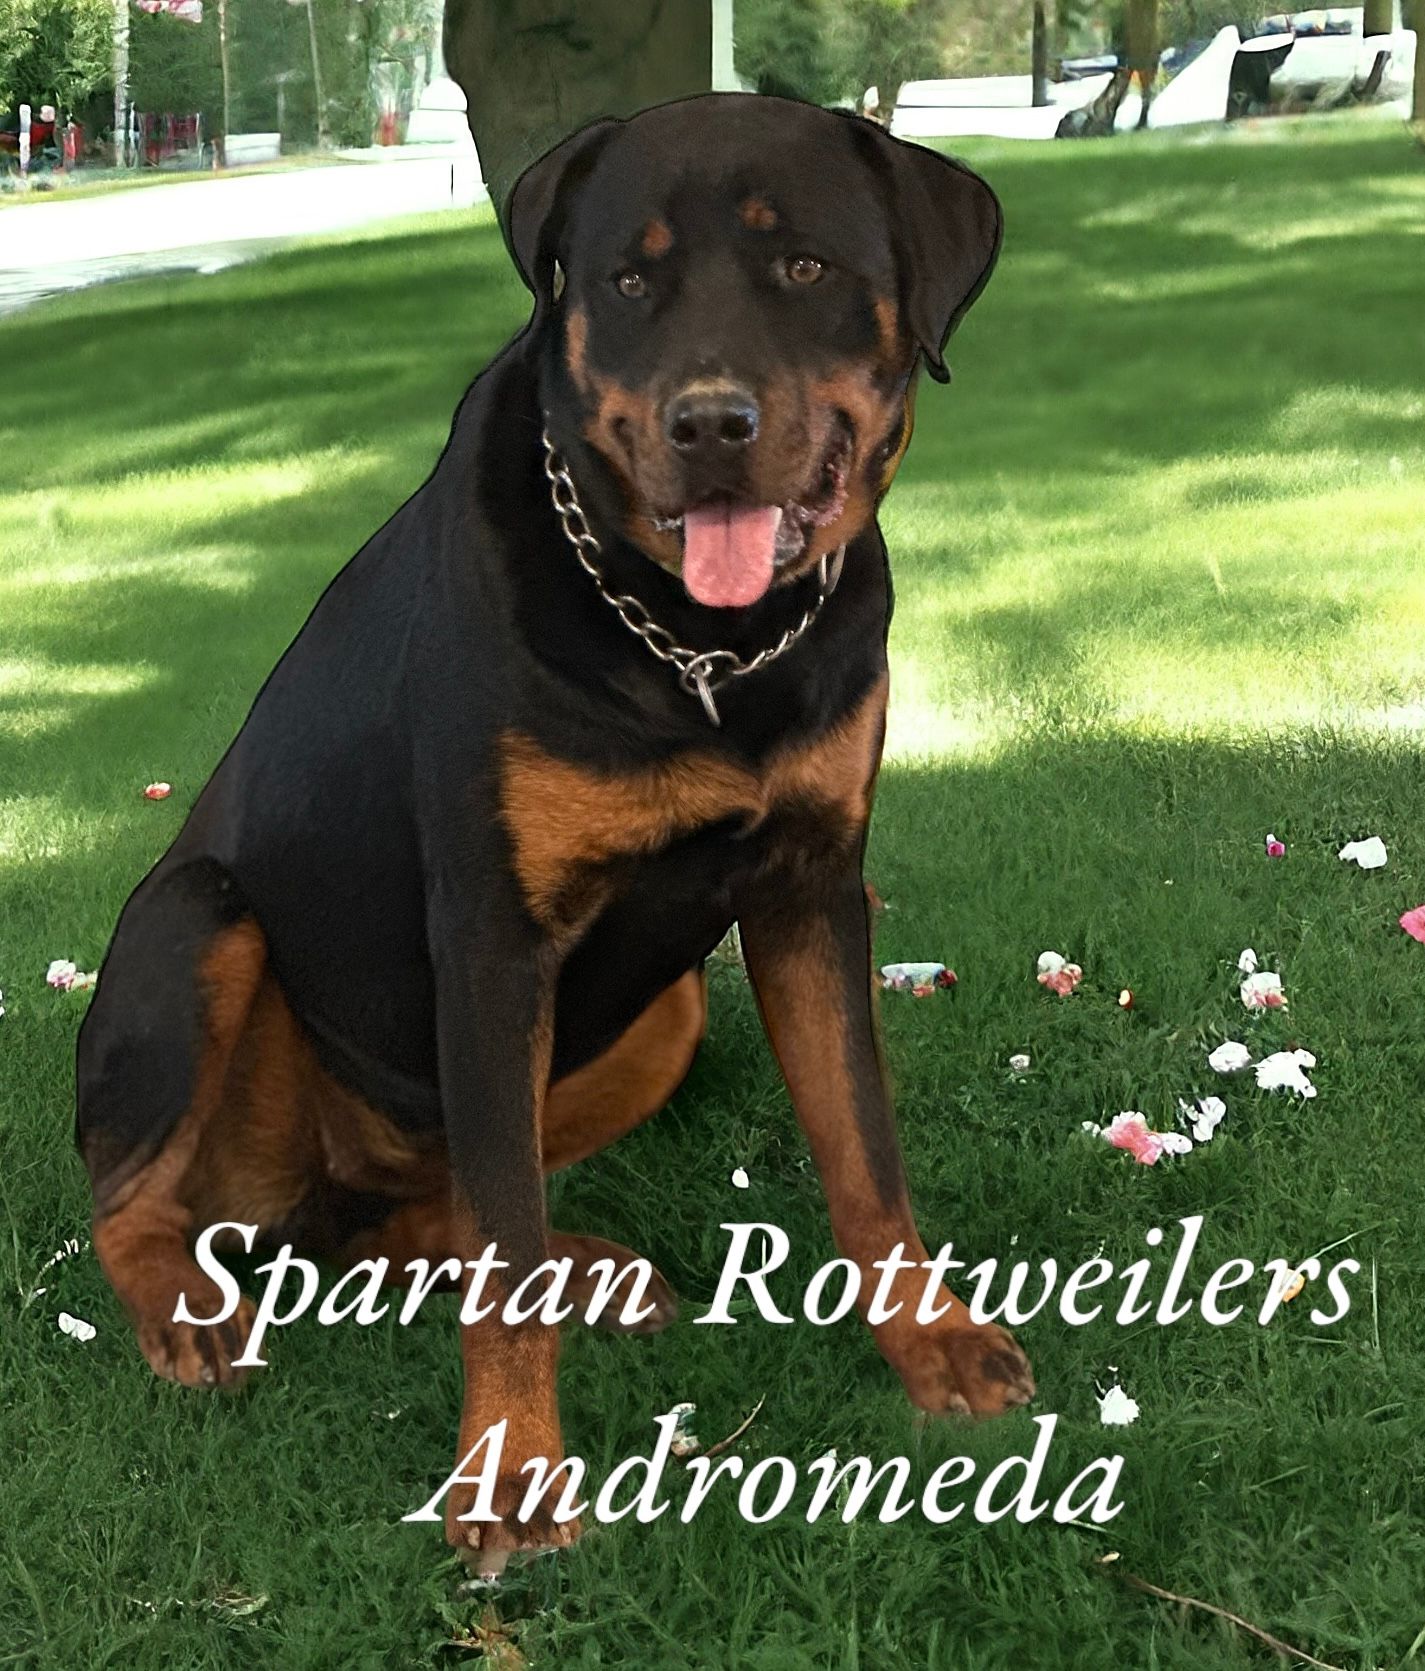 Male Rottweiler of Spartan Rottweilers , one year old